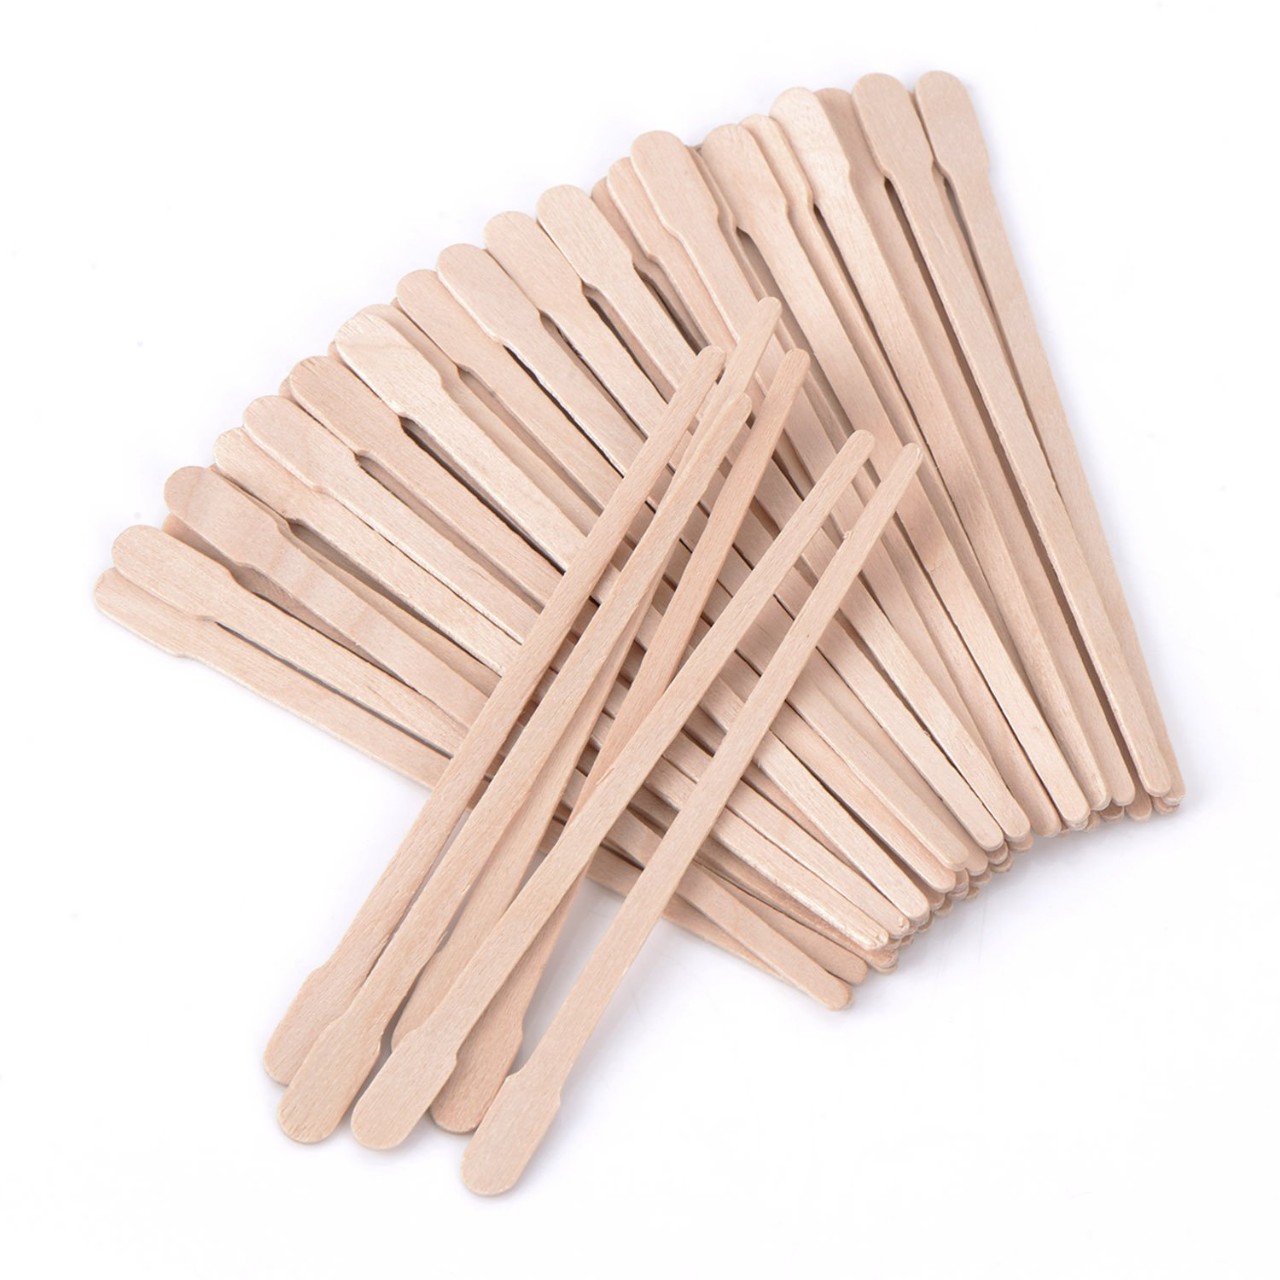 400 Packs Wax Spatulas Whaline Small Wooden Waxing Applicator Sticks Face & Eyebrows Hair Removal